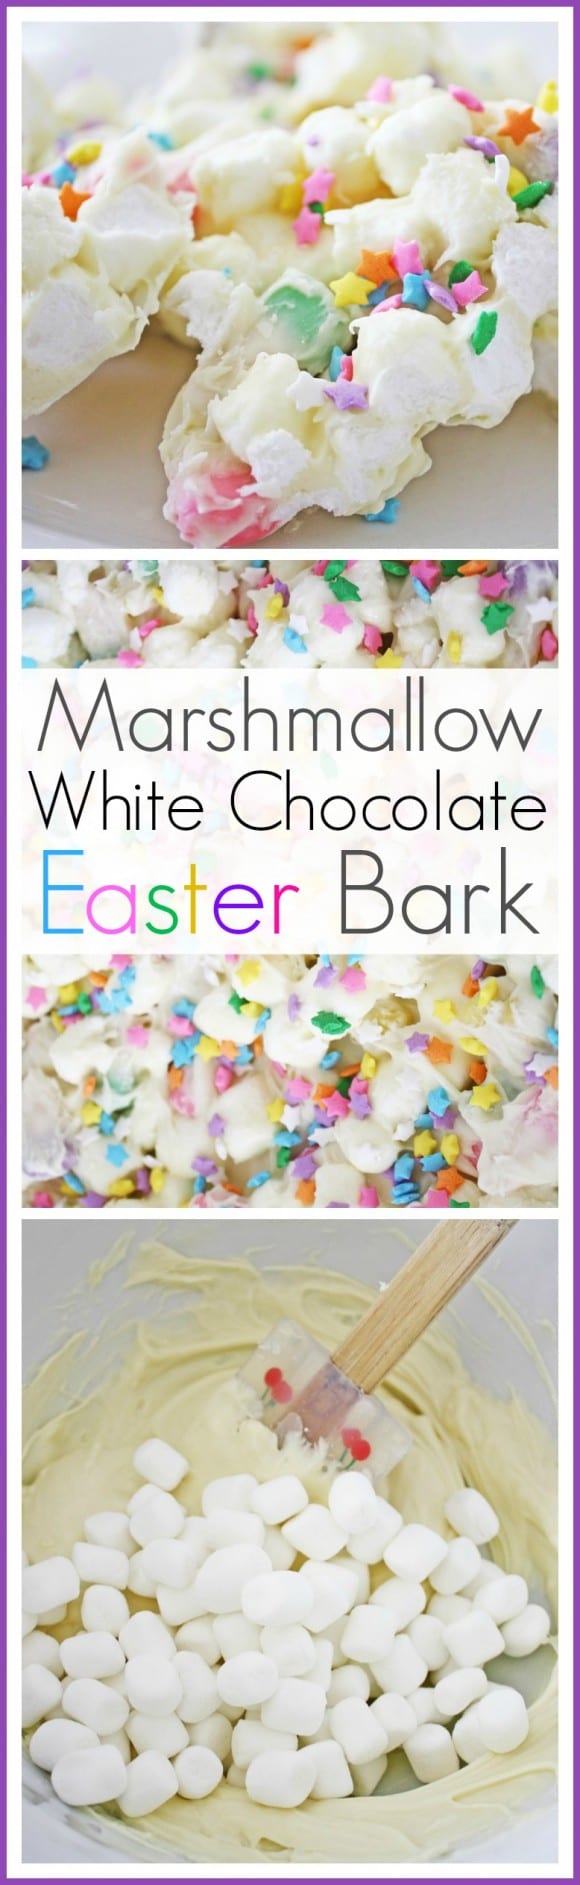 Marshmallow White Chocolate Bark Recipe great for an Easter or spring party! | CatchMyParty.com